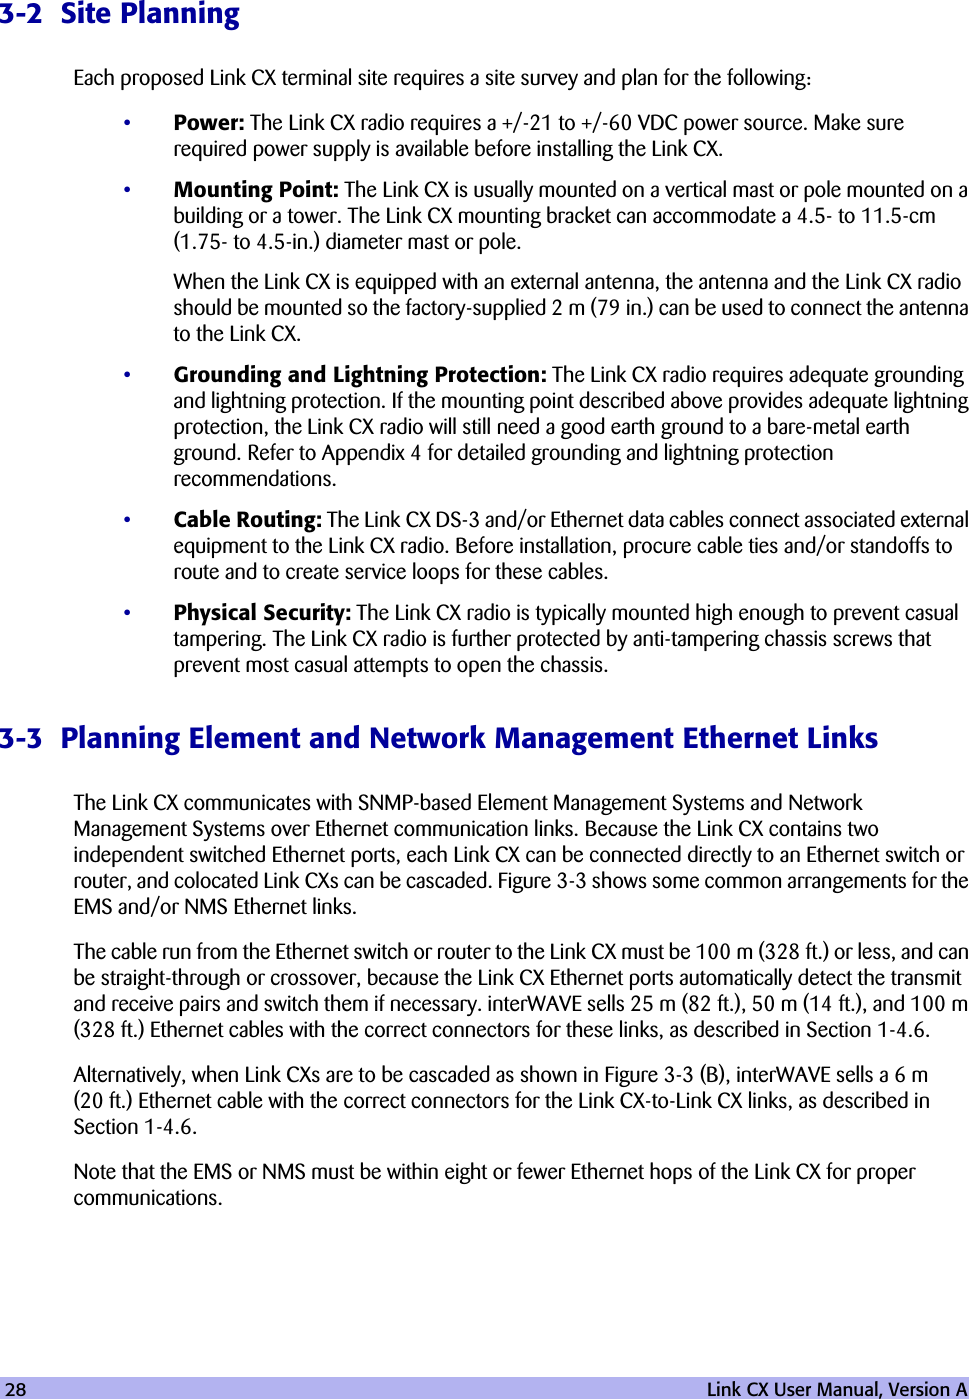 28   Link CX User Manual, Version A3-2  Site PlanningEach proposed Link CX terminal site requires a site survey and plan for the following:•Power: The Link CX radio requires a +/-21 to +/-60 VDC power source. Make sure required power supply is available before installing the Link CX. •Mounting Point: The Link CX is usually mounted on a vertical mast or pole mounted on a building or a tower. The Link CX mounting bracket can accommodate a 4.5- to 11.5-cm (1.75- to 4.5-in.) diameter mast or pole.When the Link CX is equipped with an external antenna, the antenna and the Link CX radio should be mounted so the factory-supplied 2 m (79 in.) can be used to connect the antenna to the Link CX.•Grounding and Lightning Protection: The Link CX radio requires adequate grounding and lightning protection. If the mounting point described above provides adequate lightning protection, the Link CX radio will still need a good earth ground to a bare-metal earth ground. Refer to Appendix 4 for detailed grounding and lightning protection recommendations. •Cable Routing: The Link CX DS-3 and/or Ethernet data cables connect associated external equipment to the Link CX radio. Before installation, procure cable ties and/or standoffs to route and to create service loops for these cables.•Physical Security: The Link CX radio is typically mounted high enough to prevent casual tampering. The Link CX radio is further protected by anti-tampering chassis screws that prevent most casual attempts to open the chassis.3-3  Planning Element and Network Management Ethernet LinksThe Link CX communicates with SNMP-based Element Management Systems and Network Management Systems over Ethernet communication links. Because the Link CX contains two independent switched Ethernet ports, each Link CX can be connected directly to an Ethernet switch or router, and colocated Link CXs can be cascaded. Figure 3-3 shows some common arrangements for the EMS and/or NMS Ethernet links.The cable run from the Ethernet switch or router to the Link CX must be 100 m (328 ft.) or less, and can be straight-through or crossover, because the Link CX Ethernet ports automatically detect the transmit and receive pairs and switch them if necessary. interWAVE sells 25 m (82 ft.), 50 m (14 ft.), and 100 m (328 ft.) Ethernet cables with the correct connectors for these links, as described in Section 1-4.6.Alternatively, when Link CXs are to be cascaded as shown in Figure 3-3 (B), interWAVE sells a 6 m (20 ft.) Ethernet cable with the correct connectors for the Link CX-to-Link CX links, as described in Section 1-4.6.Note that the EMS or NMS must be within eight or fewer Ethernet hops of the Link CX for proper communications.